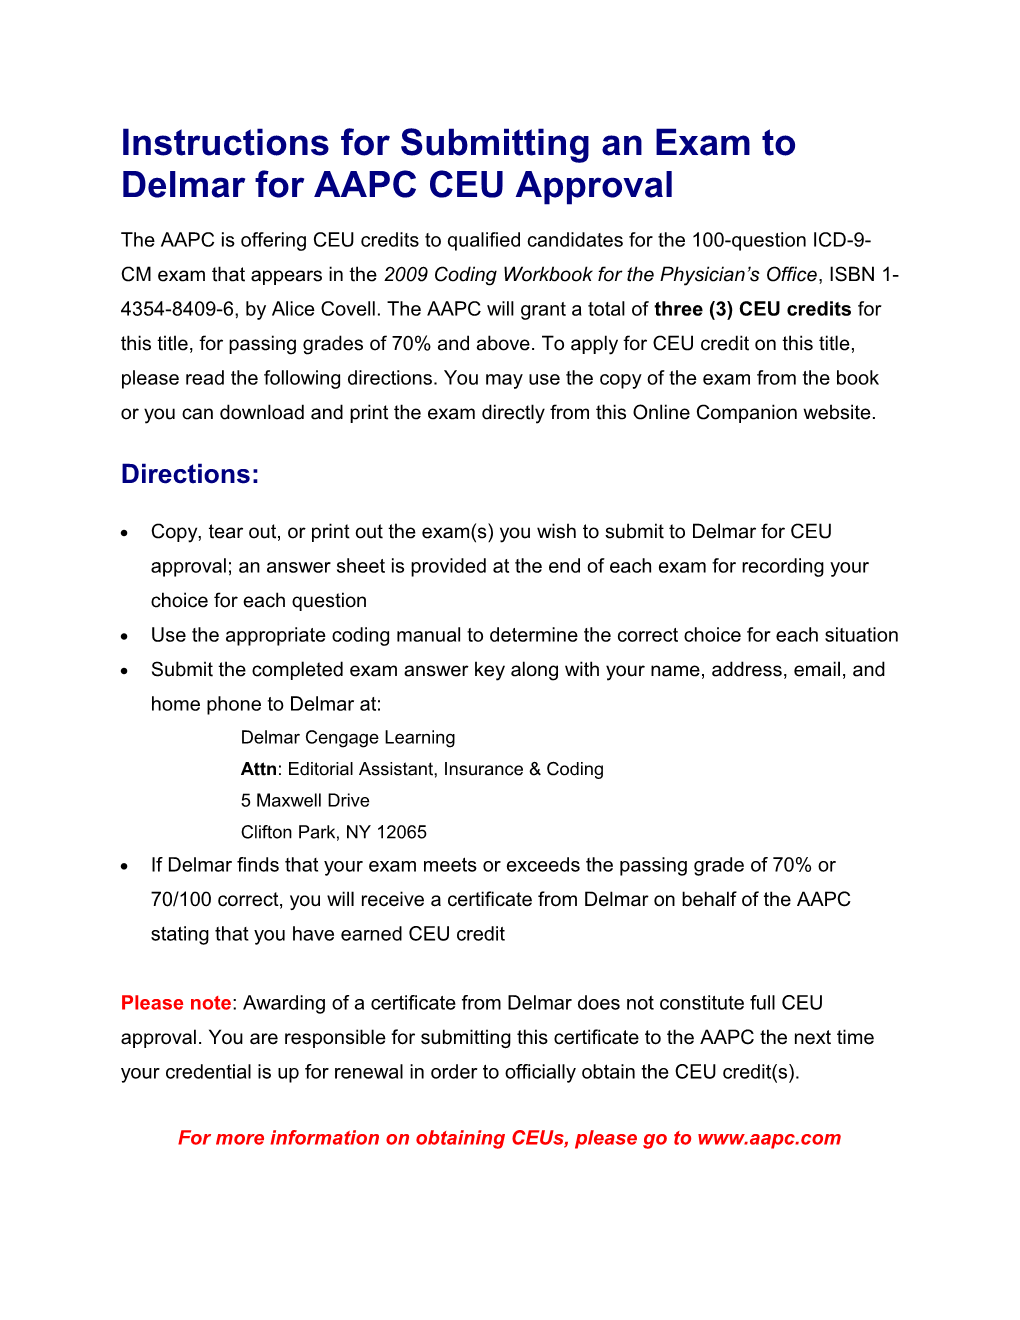 Instructions for Submitting an Exam to Delmar for AAPC CEU Approval